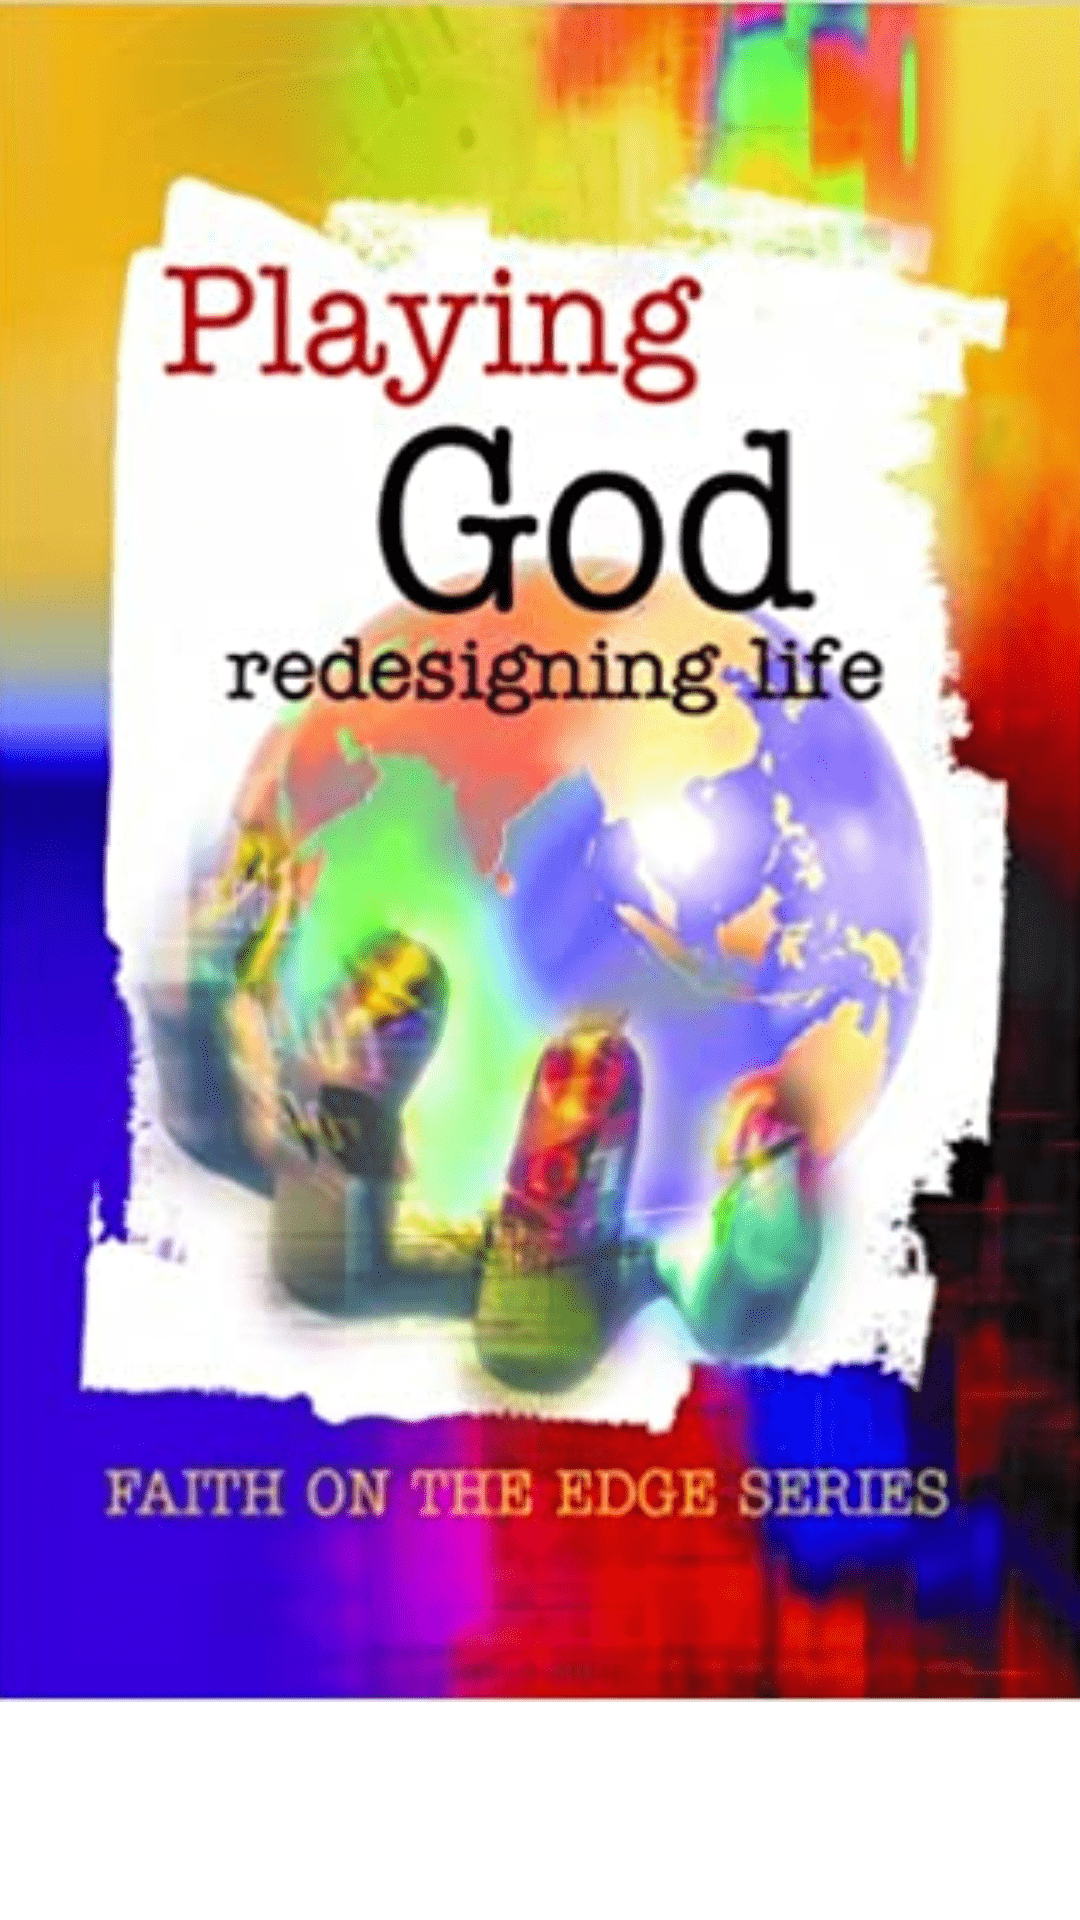 Faith on the Edge: Playing God: Redesigning Life